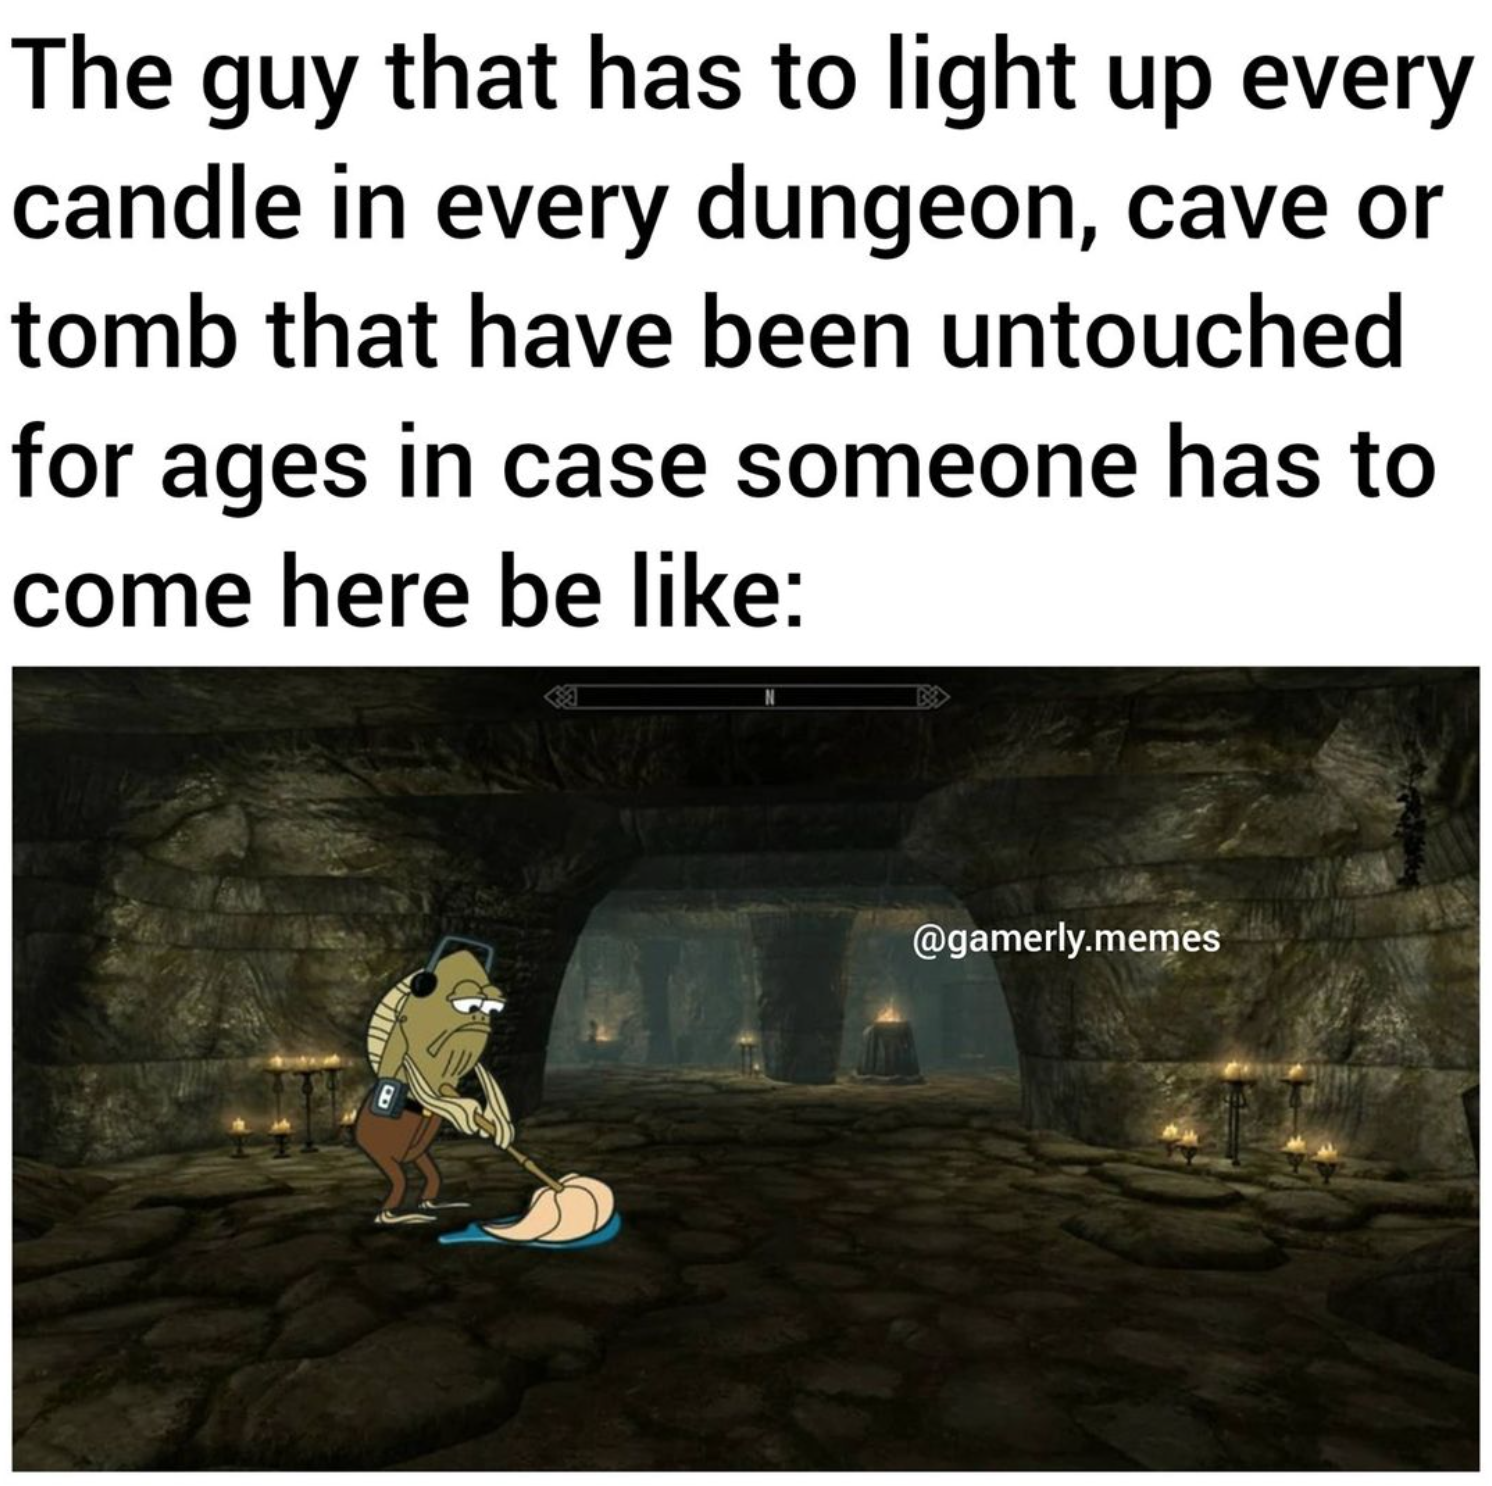 funny gaming memes -  photo caption - The guy that has to light up every candle in every dungeon, cave or tomb that have been untouched for ages in case someone has to come here be .memes